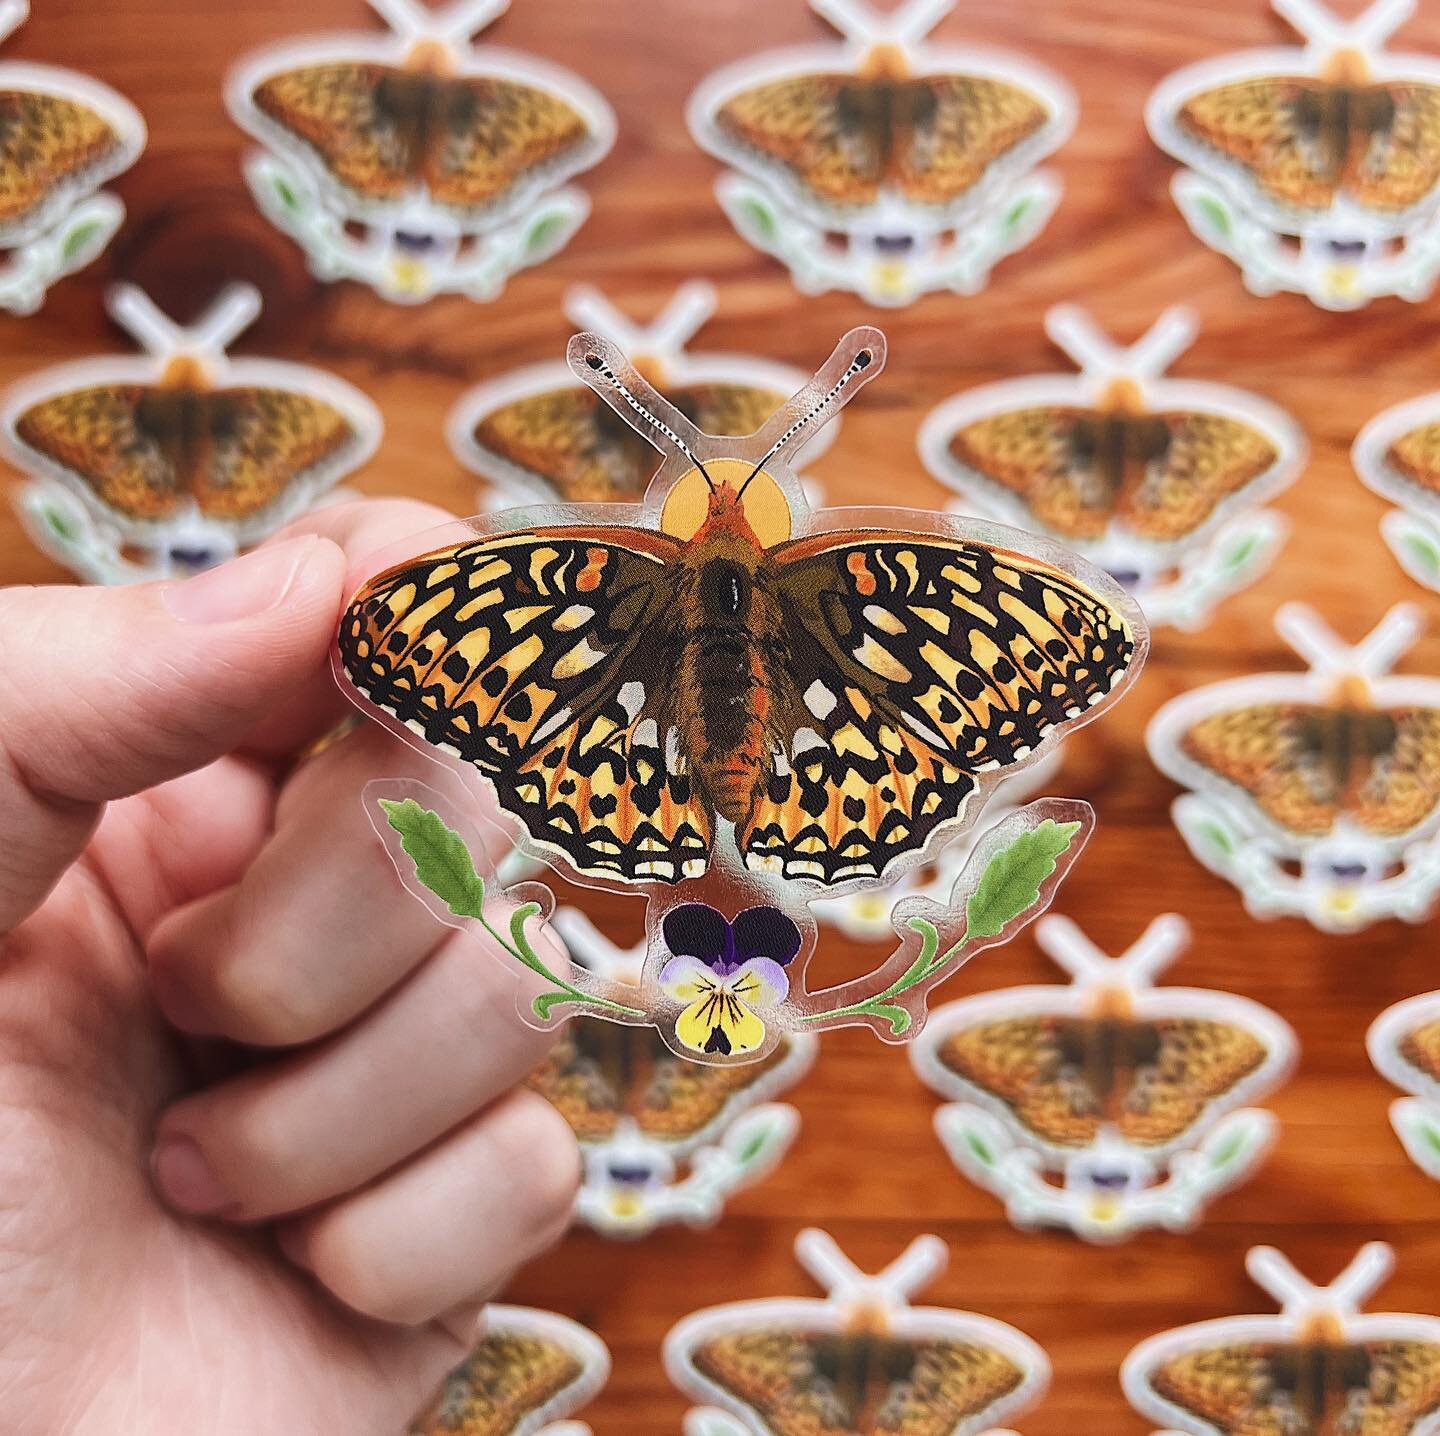 Two new stickers coming to my shop on Friday! The fourth endangered butterfly in the series is a gorgeous Callippe Silverspot Butterfly with its host plant &ldquo;Johnny Jump Up&rdquo; aka wild pansy! As always, the butterflies of this series are on 